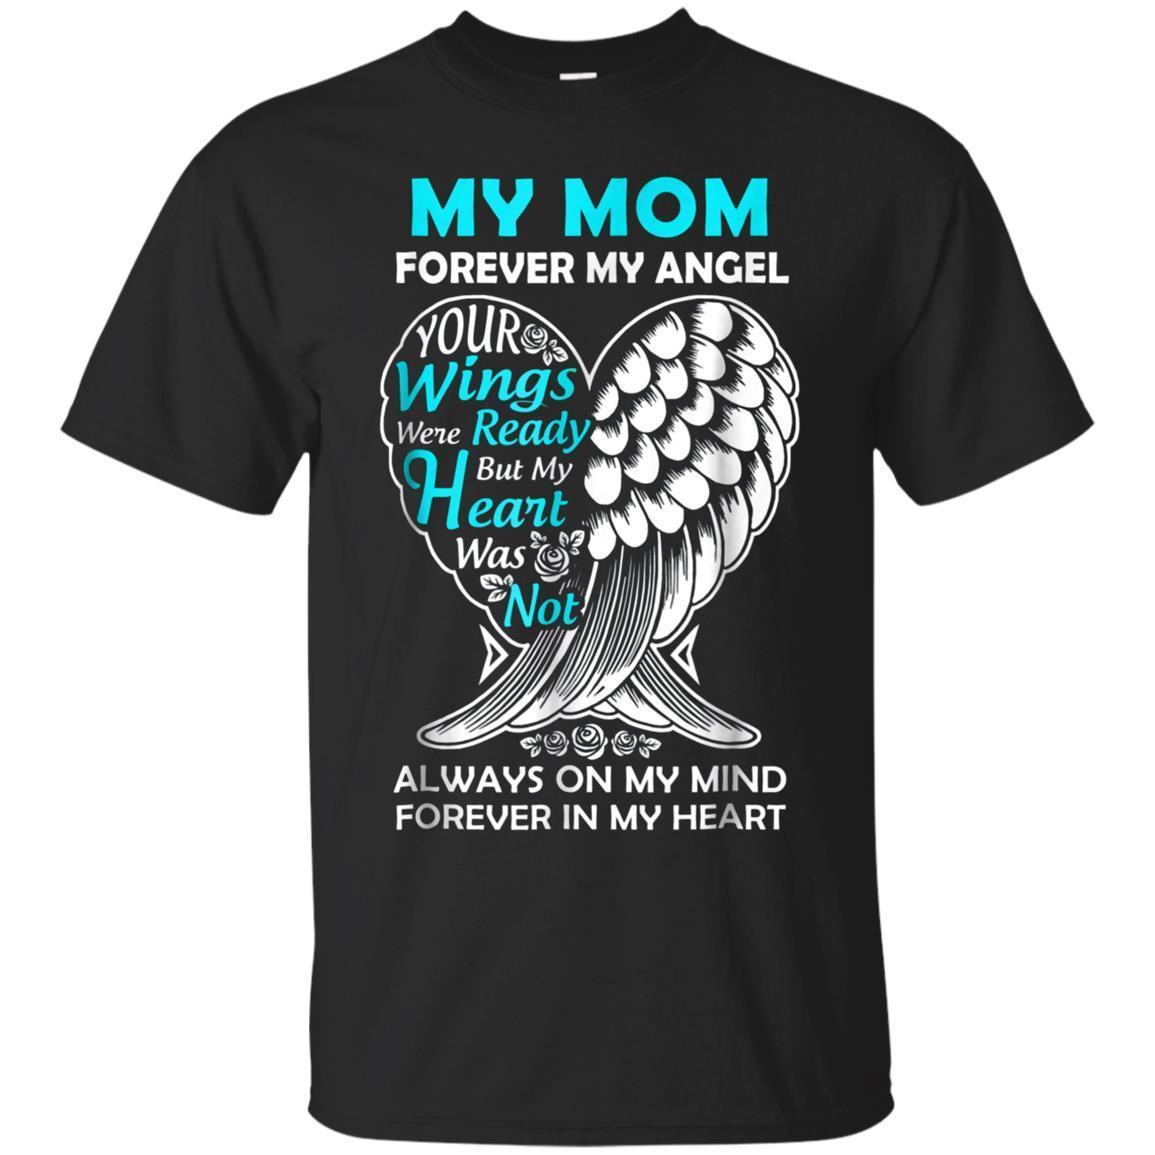 Mom In Heaven Forever My Angel – In Memory T Shirt funny shirts, gift ...